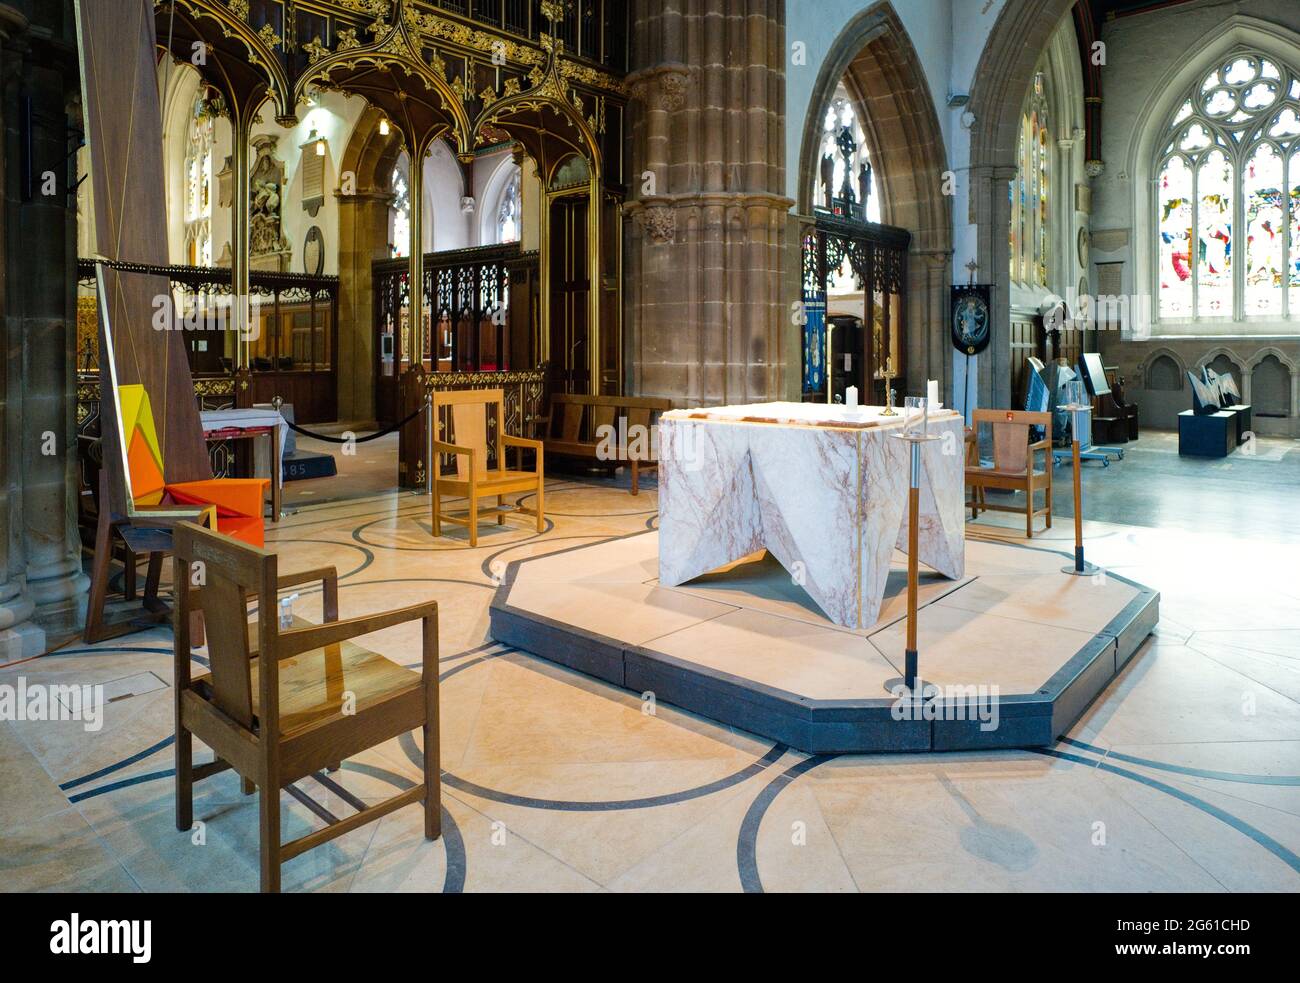 The main altar at St Martin's the Catherdral church of Leicester Stock Photo